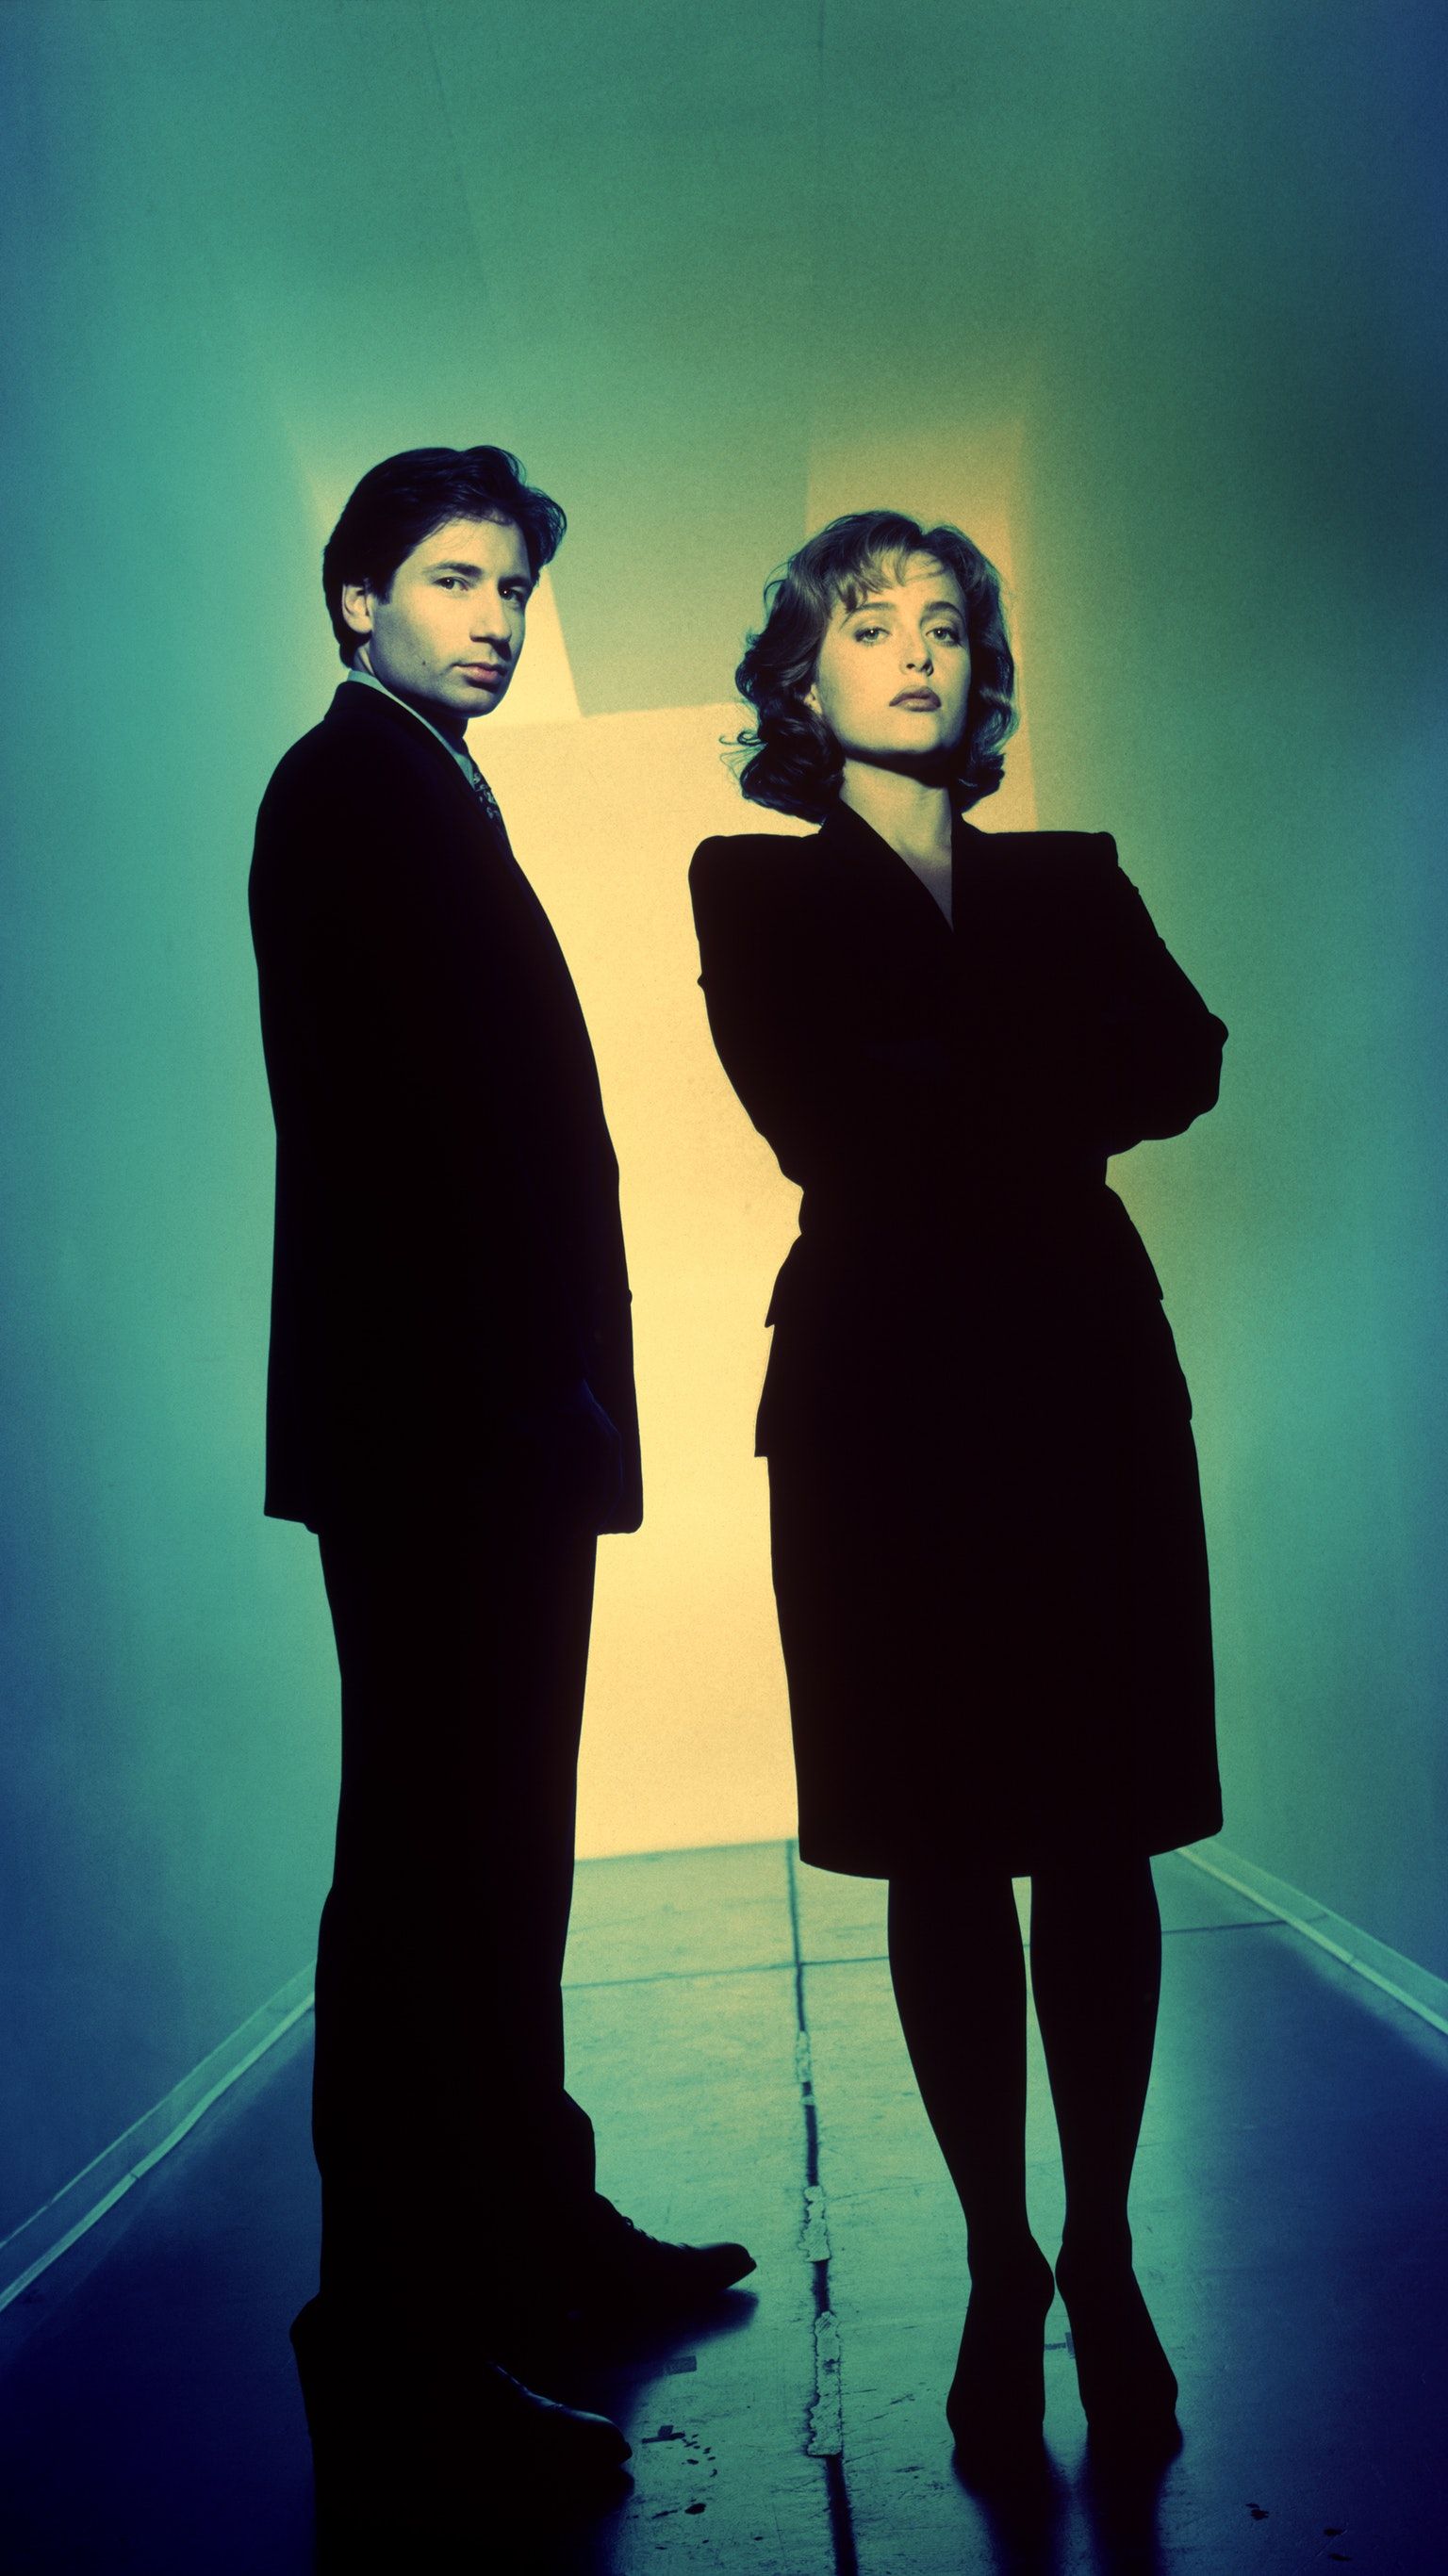 The X Files Phone Wallpaper. Moviemania. X Files, Mulder, Mulder Scully